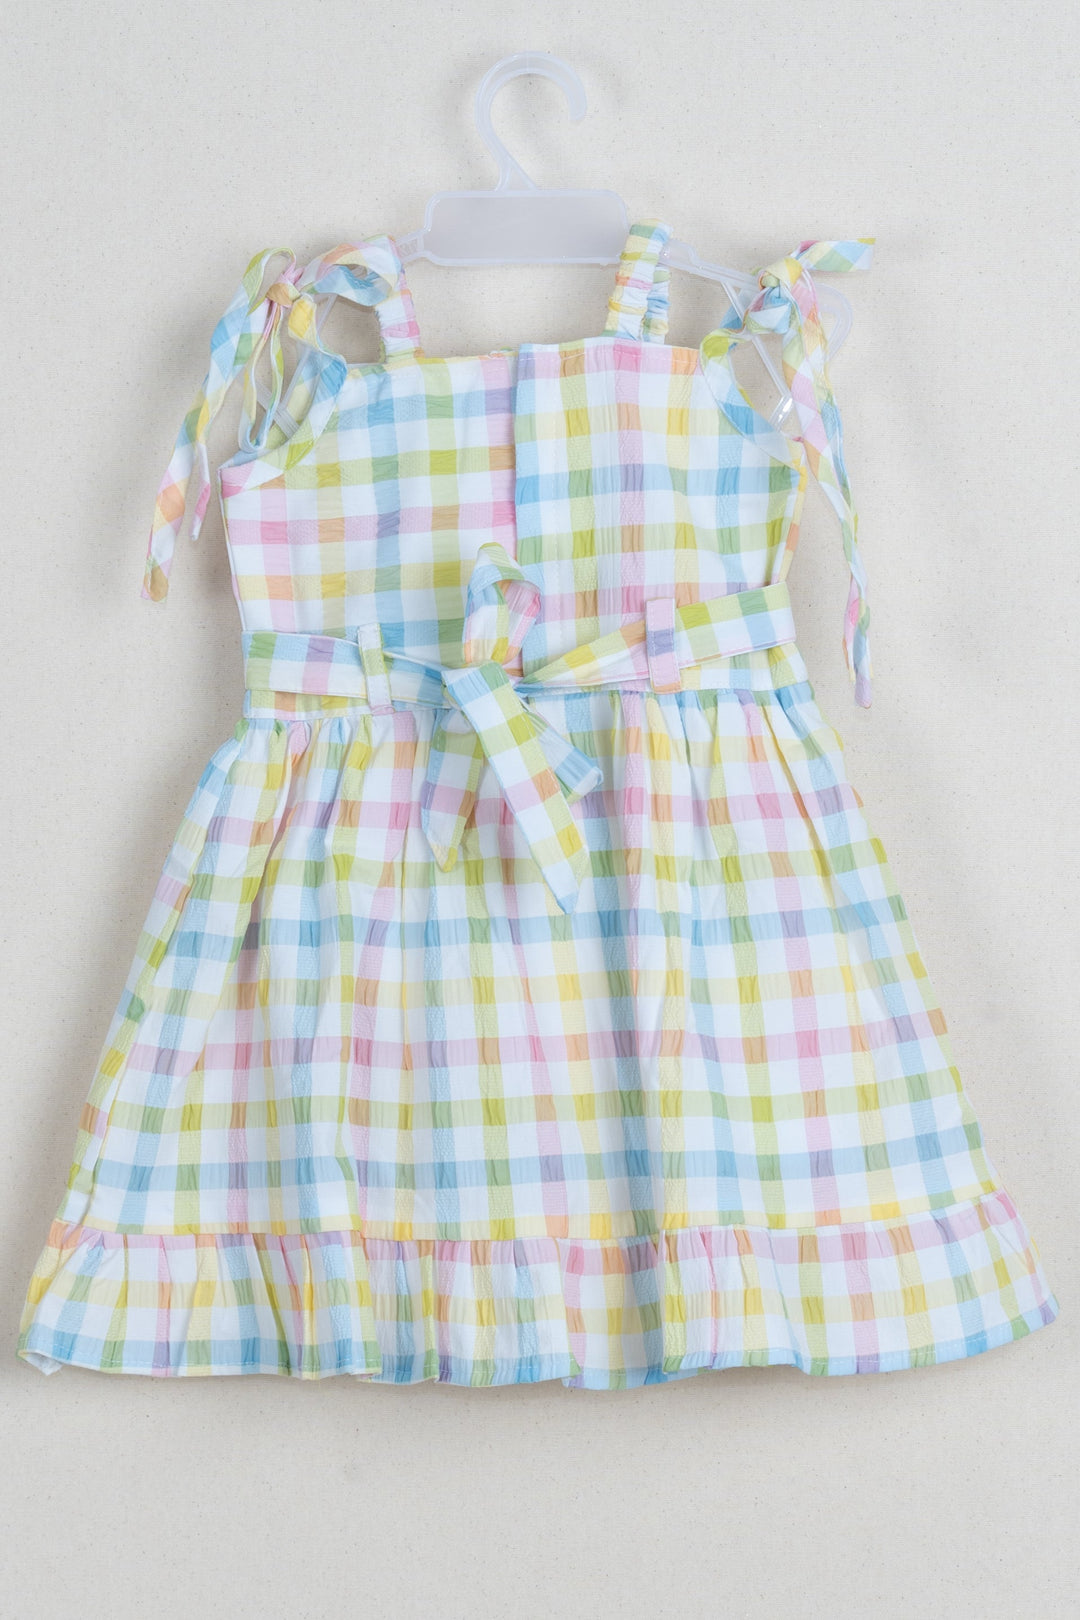 The Nesavu Girls Cotton Frock Multi-Color Checkered Pattern Green Cotton Frock For Girls Nesavu Multi-Color Checkered Pattern Green Cotton Frock For Girls | Premium Girls Dress Collection | The Nesavu